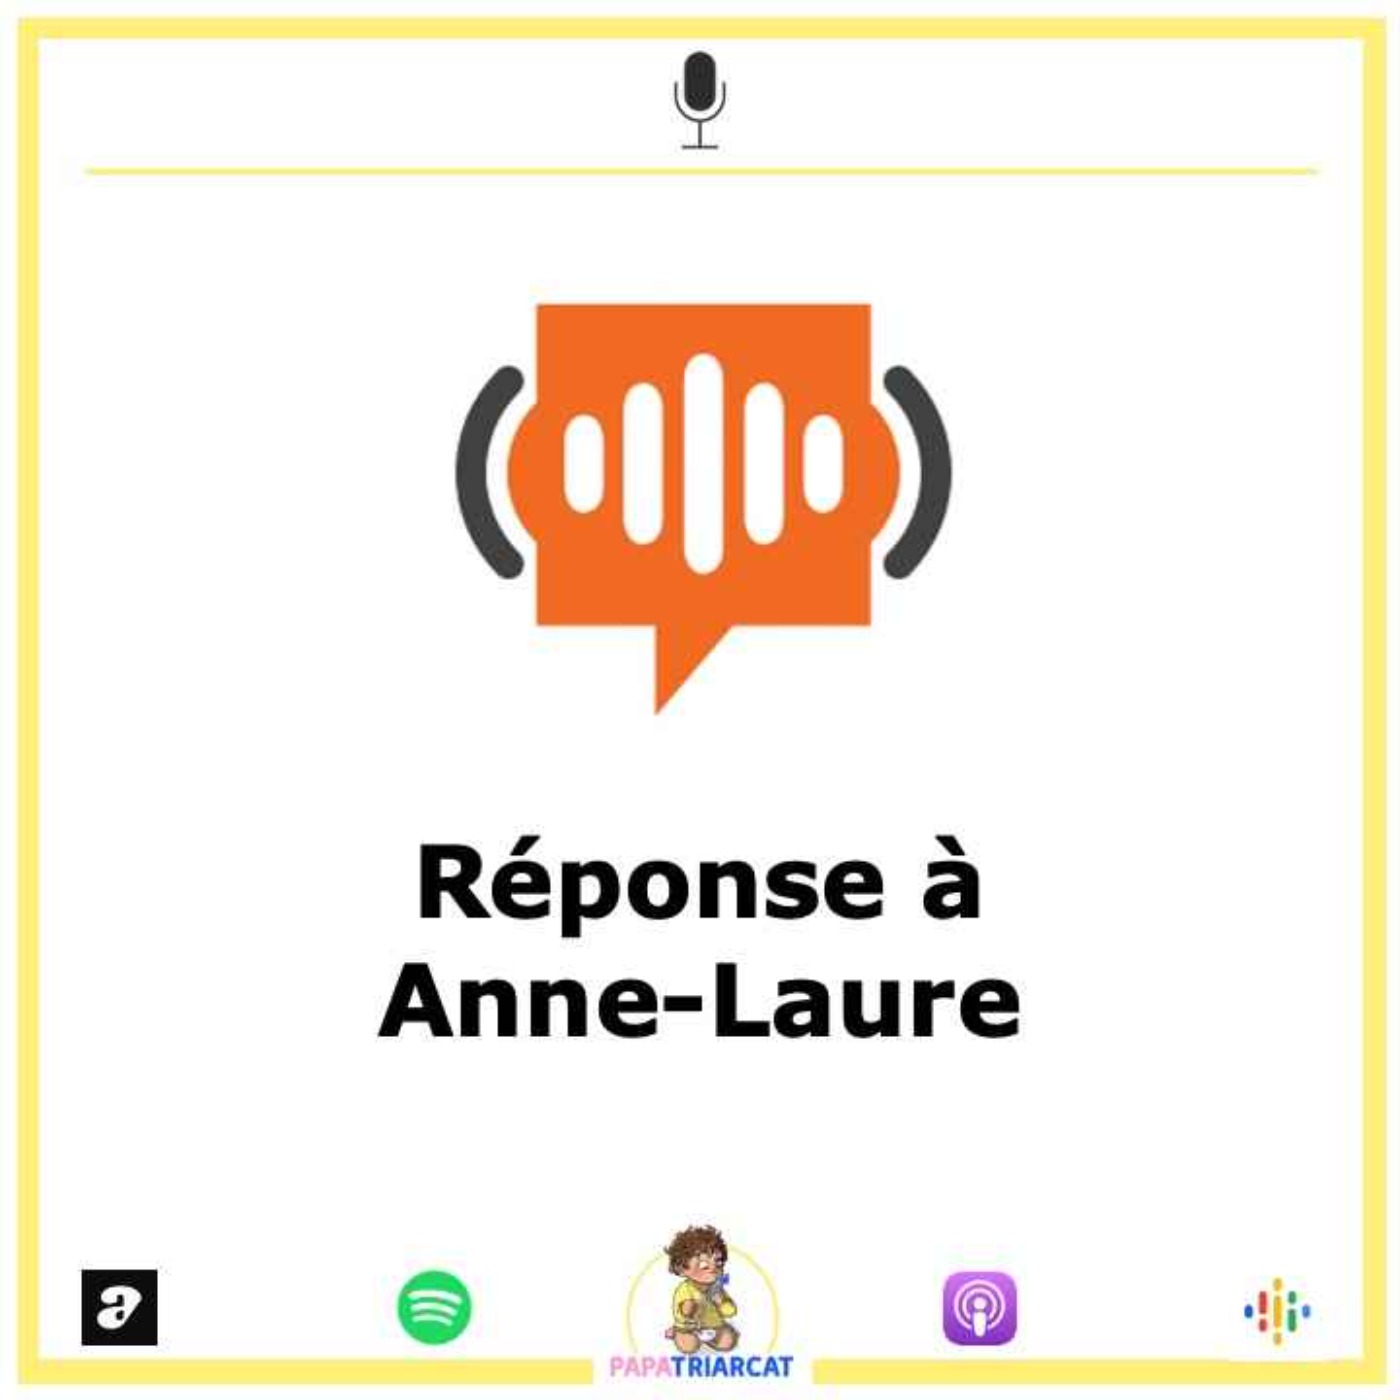 REPONSE #28 - Anne-Laure